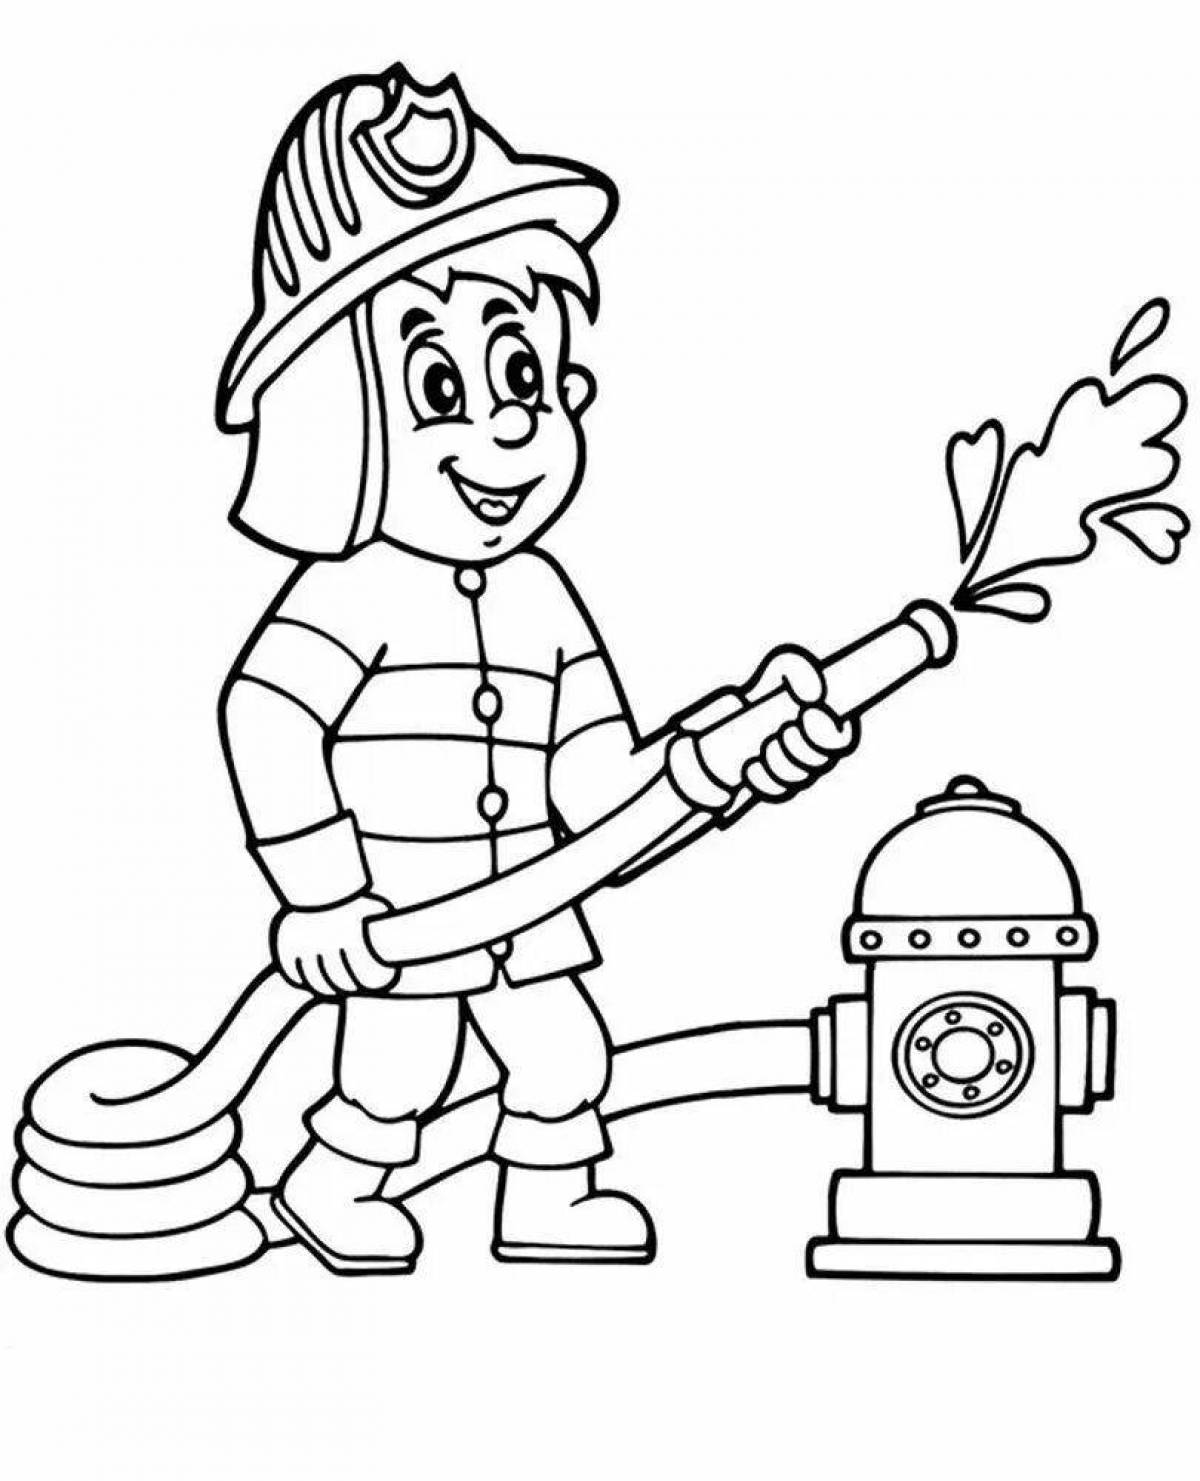 Colorful firefighter profession coloring page